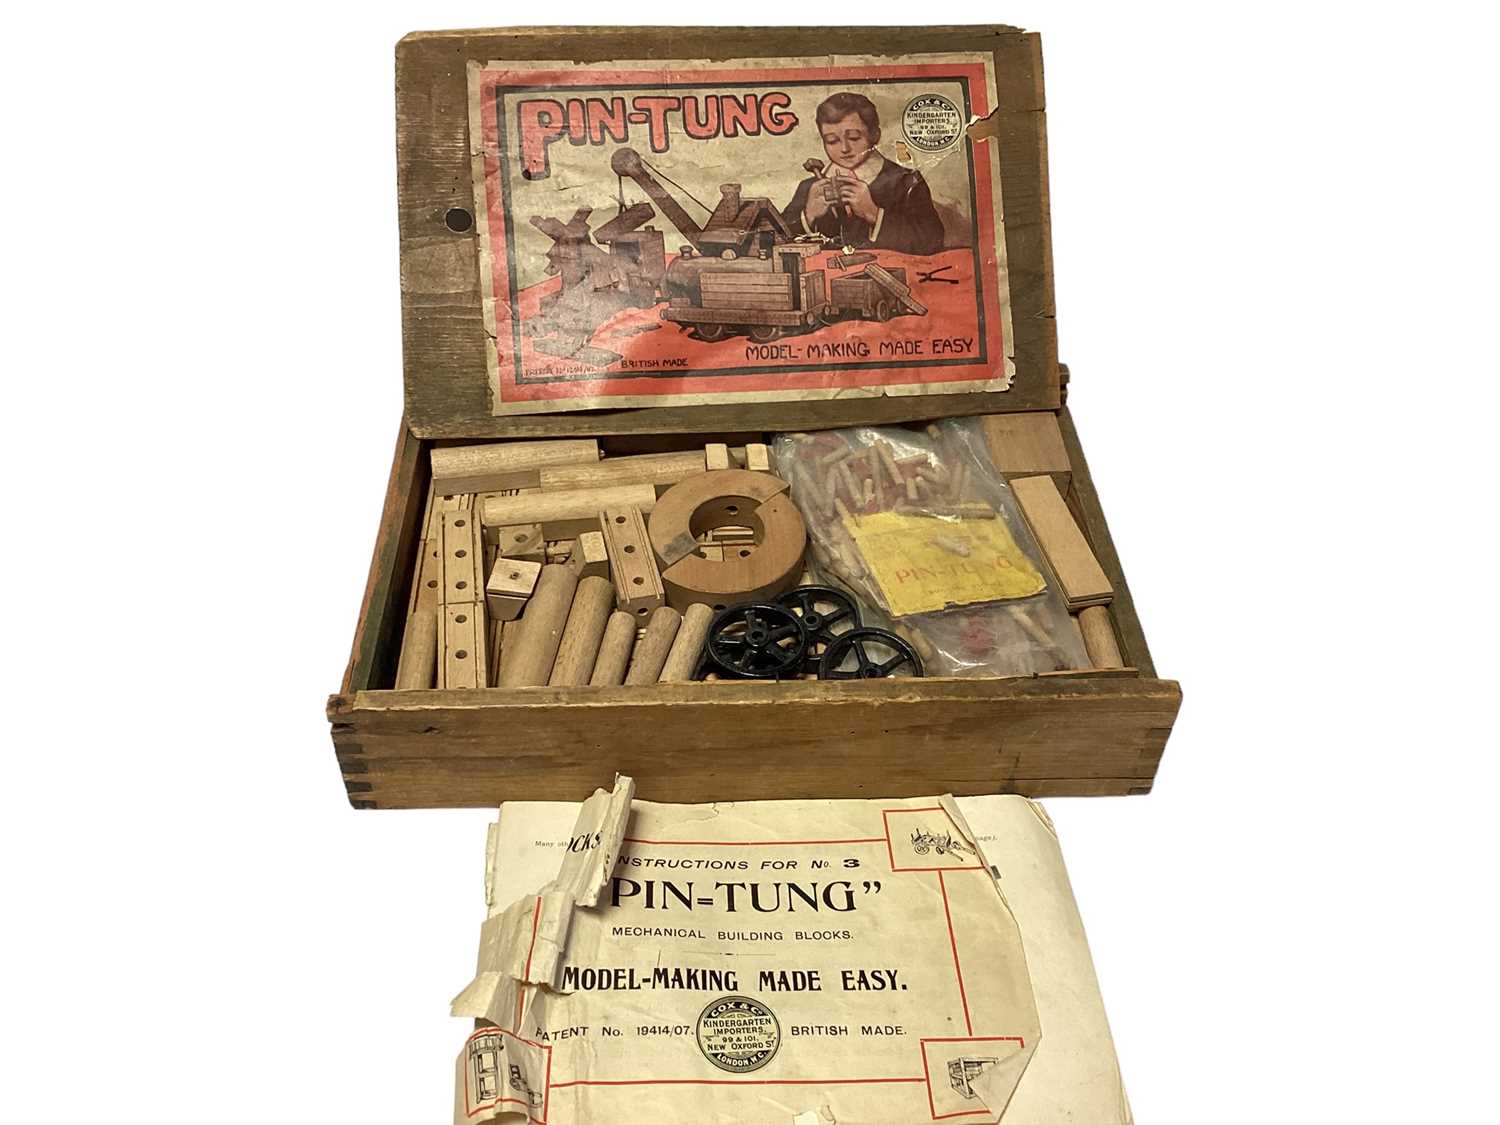 Lott's solid stone building bricks & Pin-Tung wooden building kit, boxed (2) - Image 3 of 3